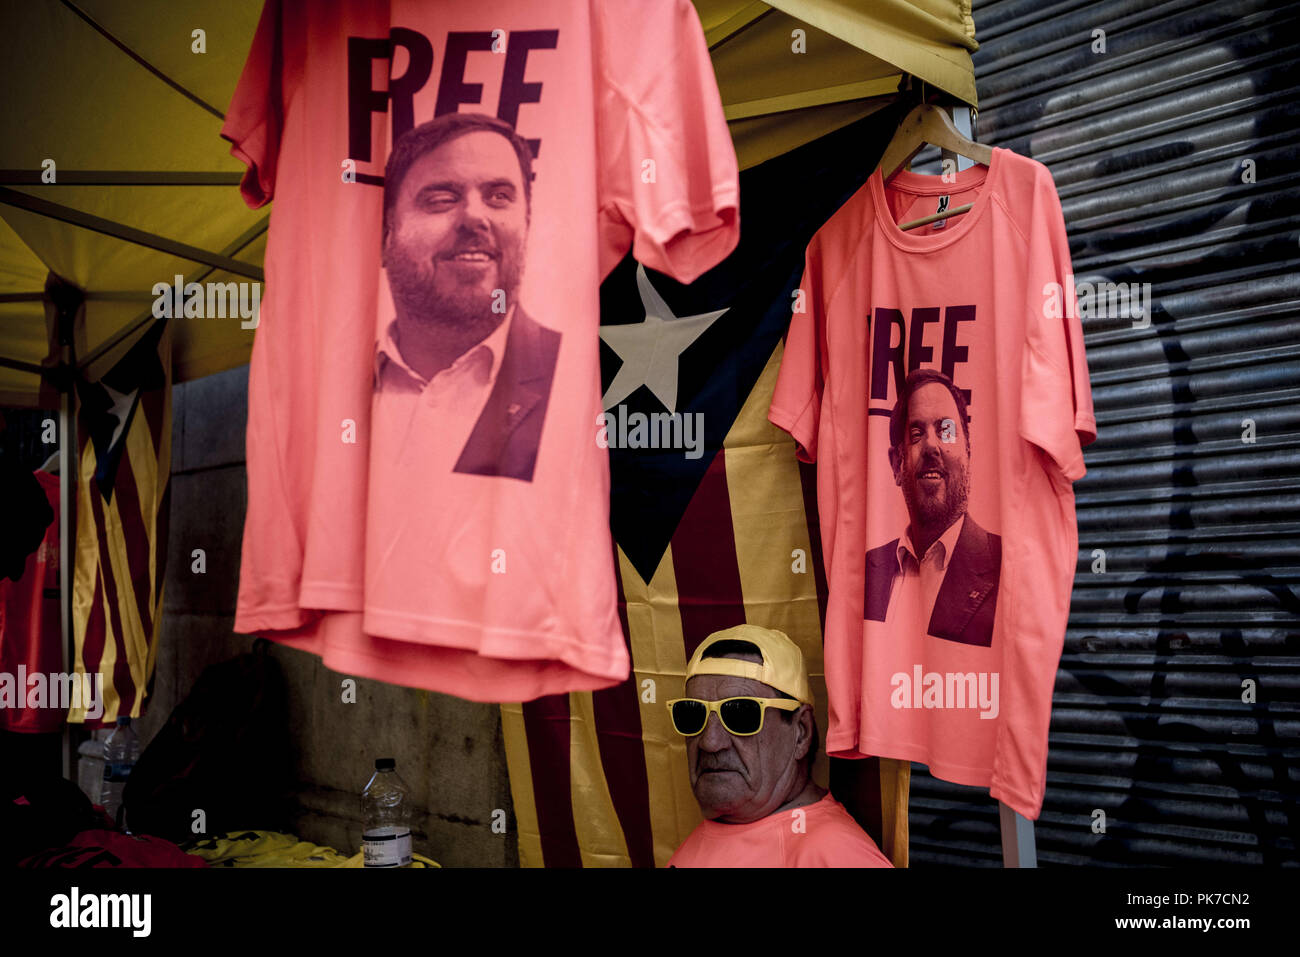 Barcelona, Catalonia, Spain. 11th Sep, 2018. T-shirts demanding freedom for former Catalan vice-president ORIOL JUNQUERAS are displayed in a stall during La Diada in Barcelona. Catalans celebrate La Diada or Catalonia National Day in an atmosphere of conflict with the Spanish Government for the imprisoned independentist leaders and proclamations in favor of independence. Credit: Jordi Boixareu/ZUMA Wire/Alamy Live News Stock Photo